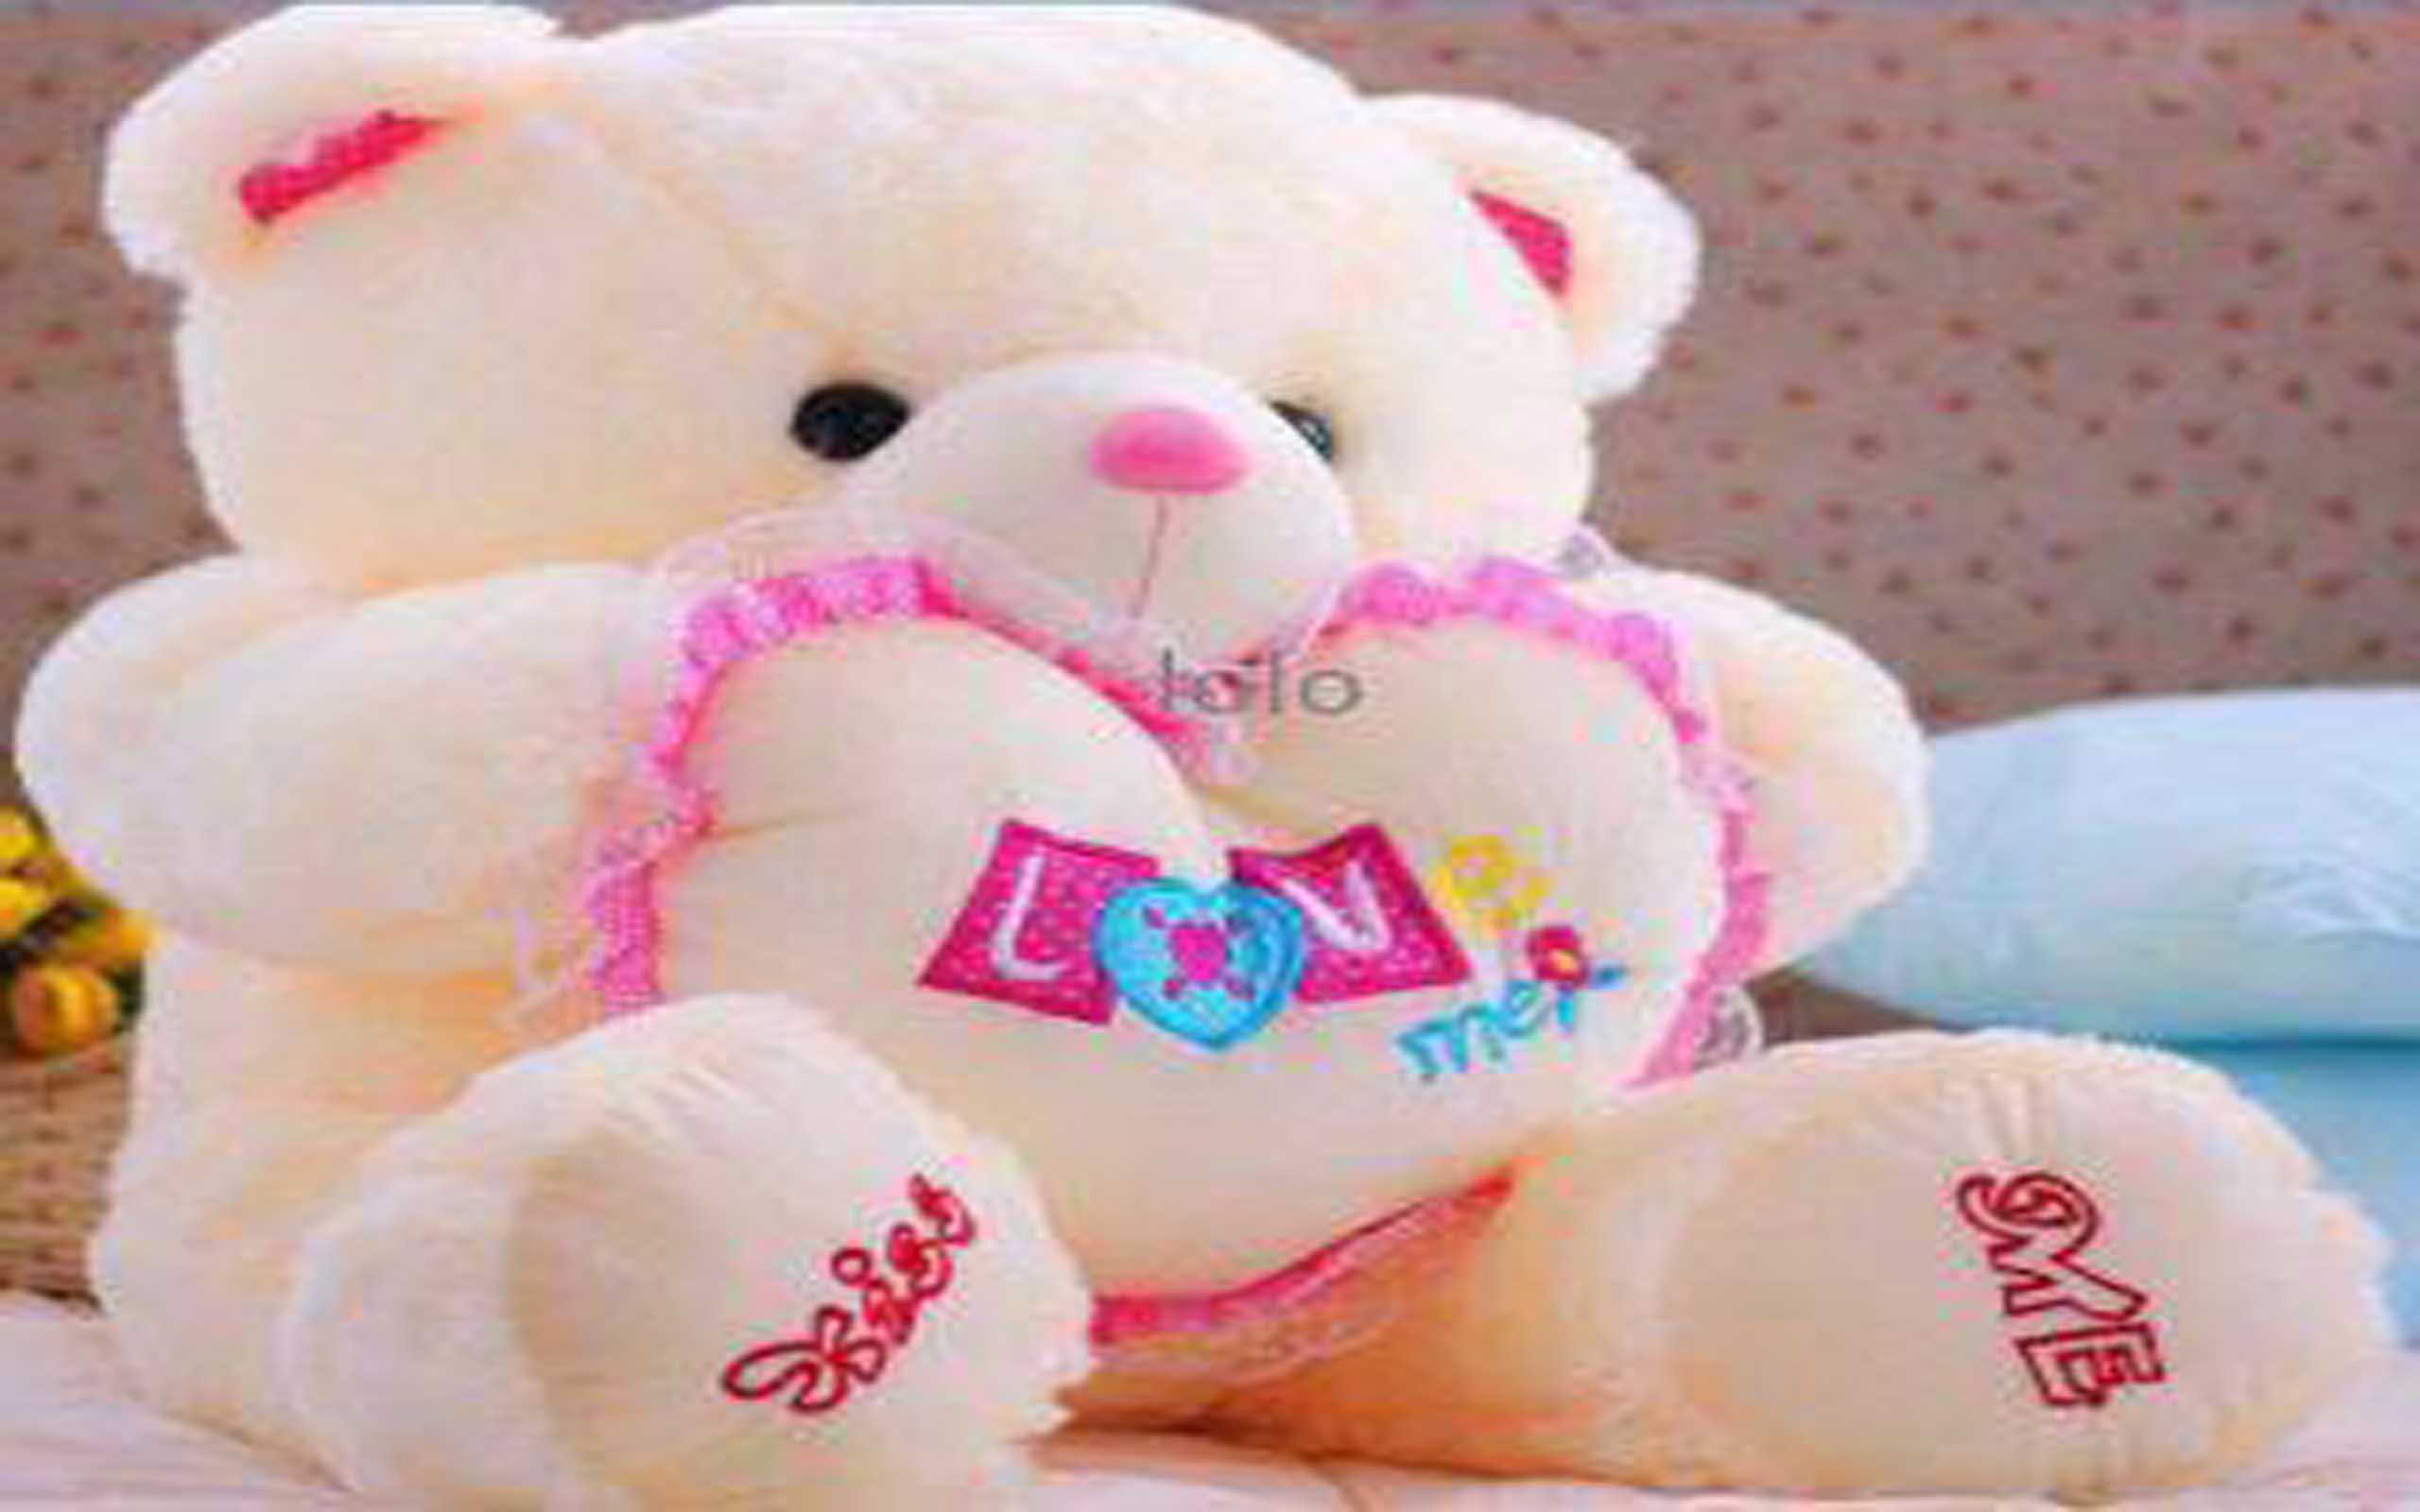 Loving Teddy Bear Hd Wallpapers Free Download For Desktop, - Teddy Bear Hd Pics Free Download , HD Wallpaper & Backgrounds